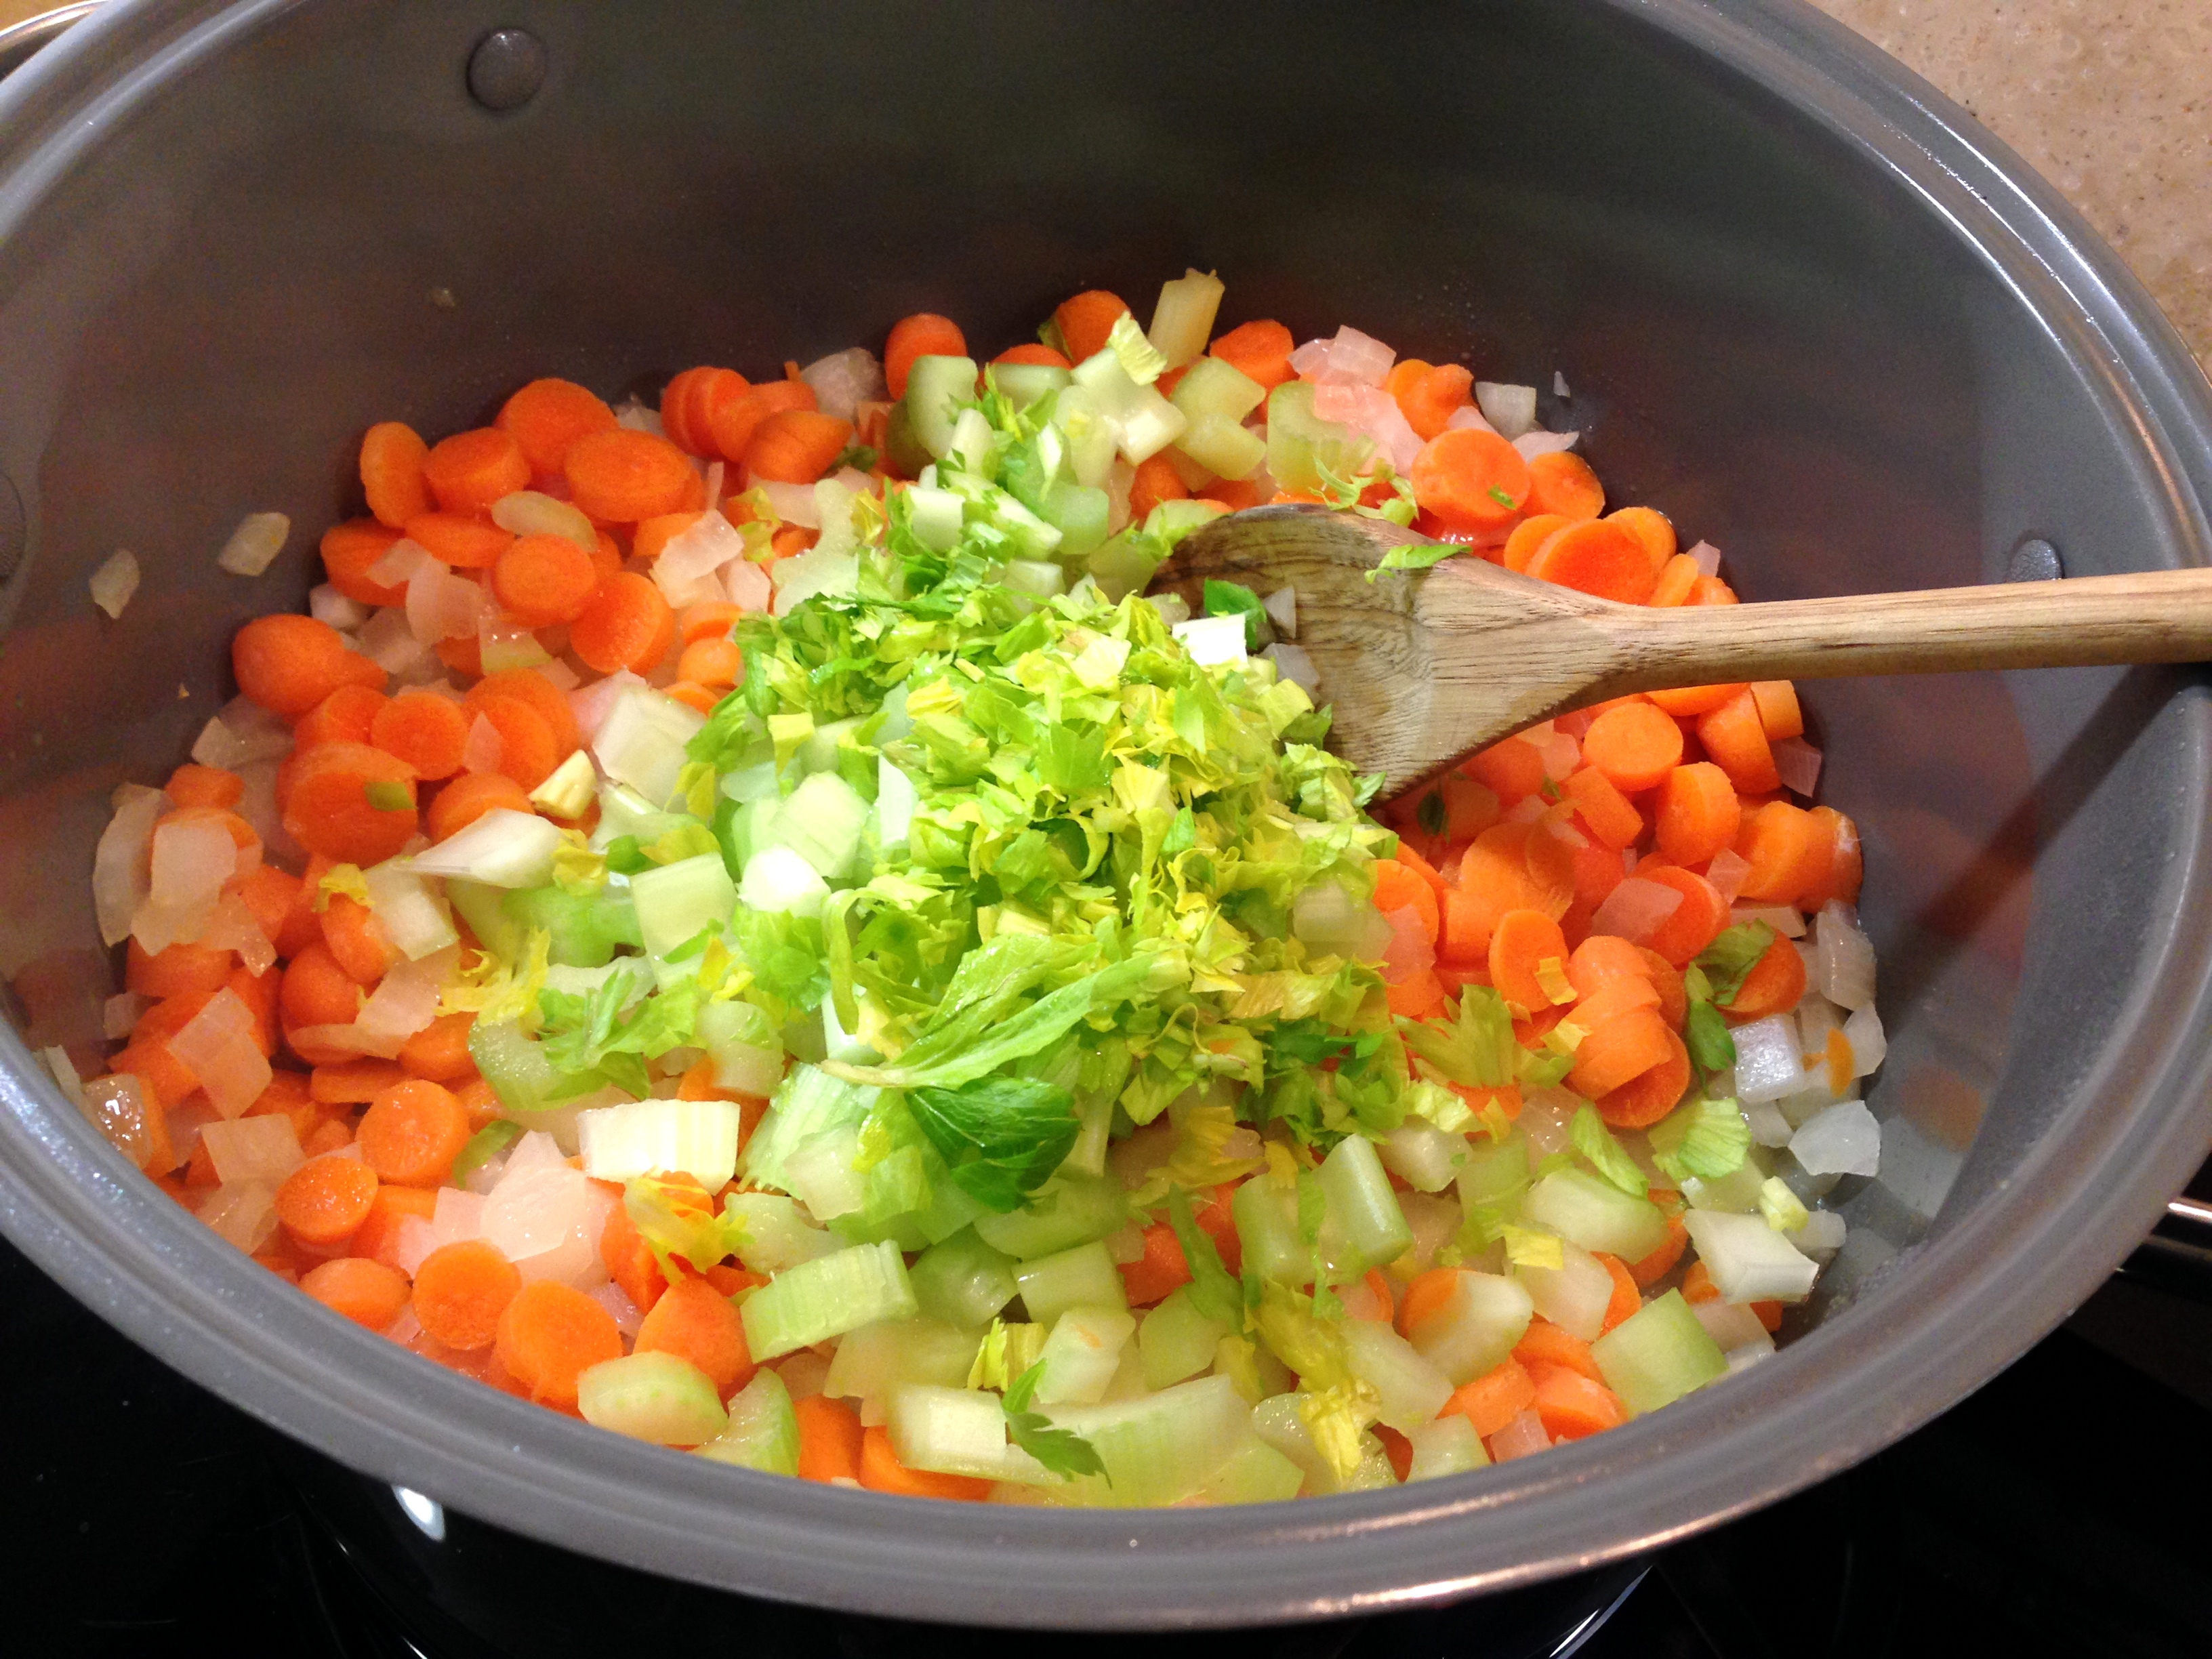 Add celery and carrots